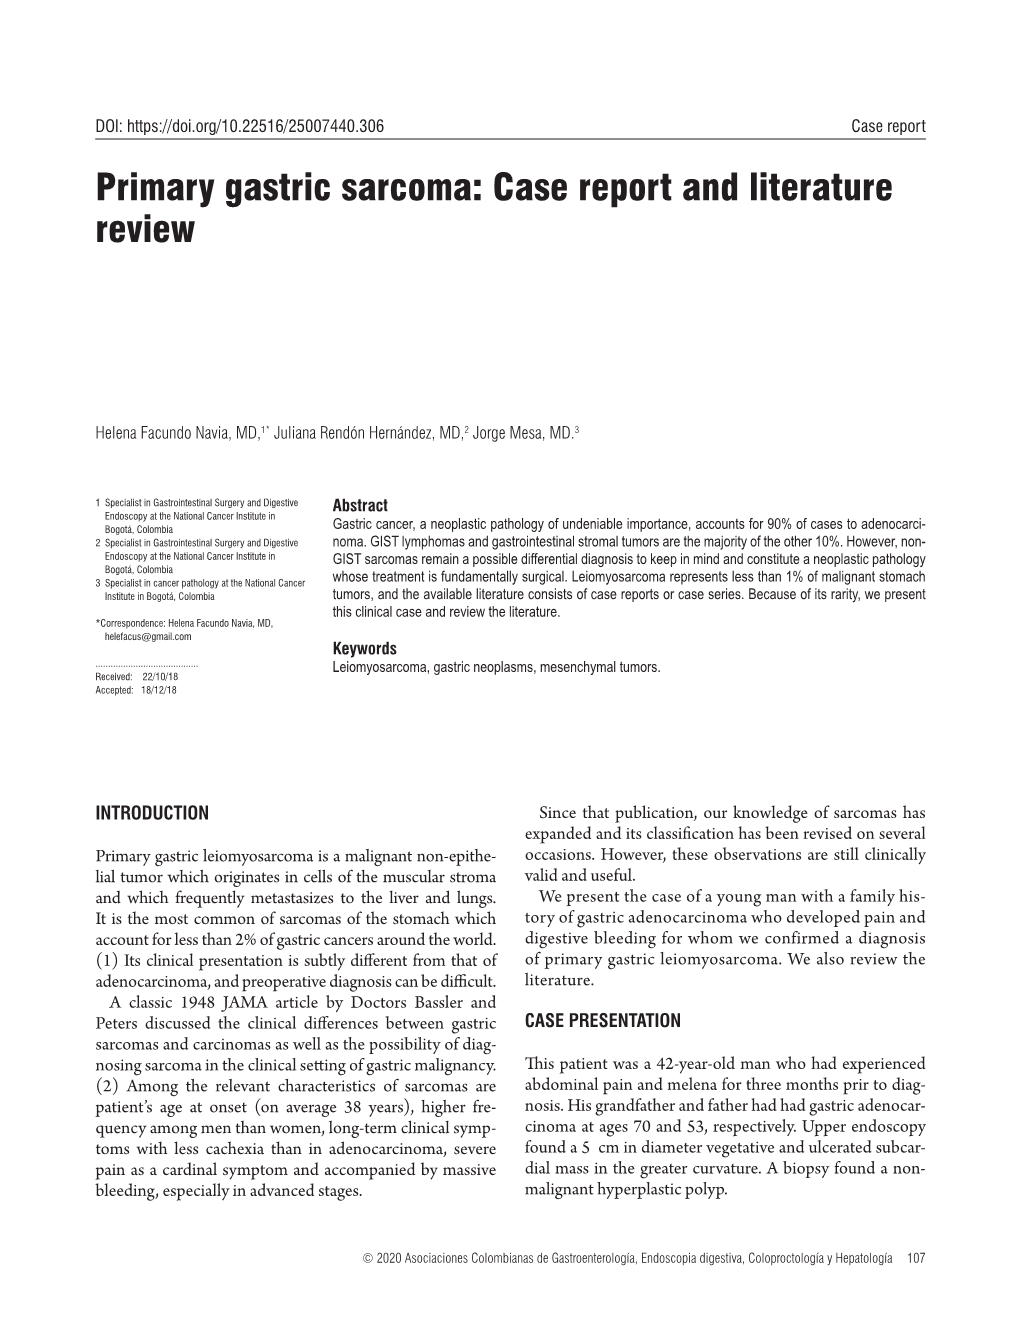 Primary Gastric Sarcoma: Case Report and Literature Review